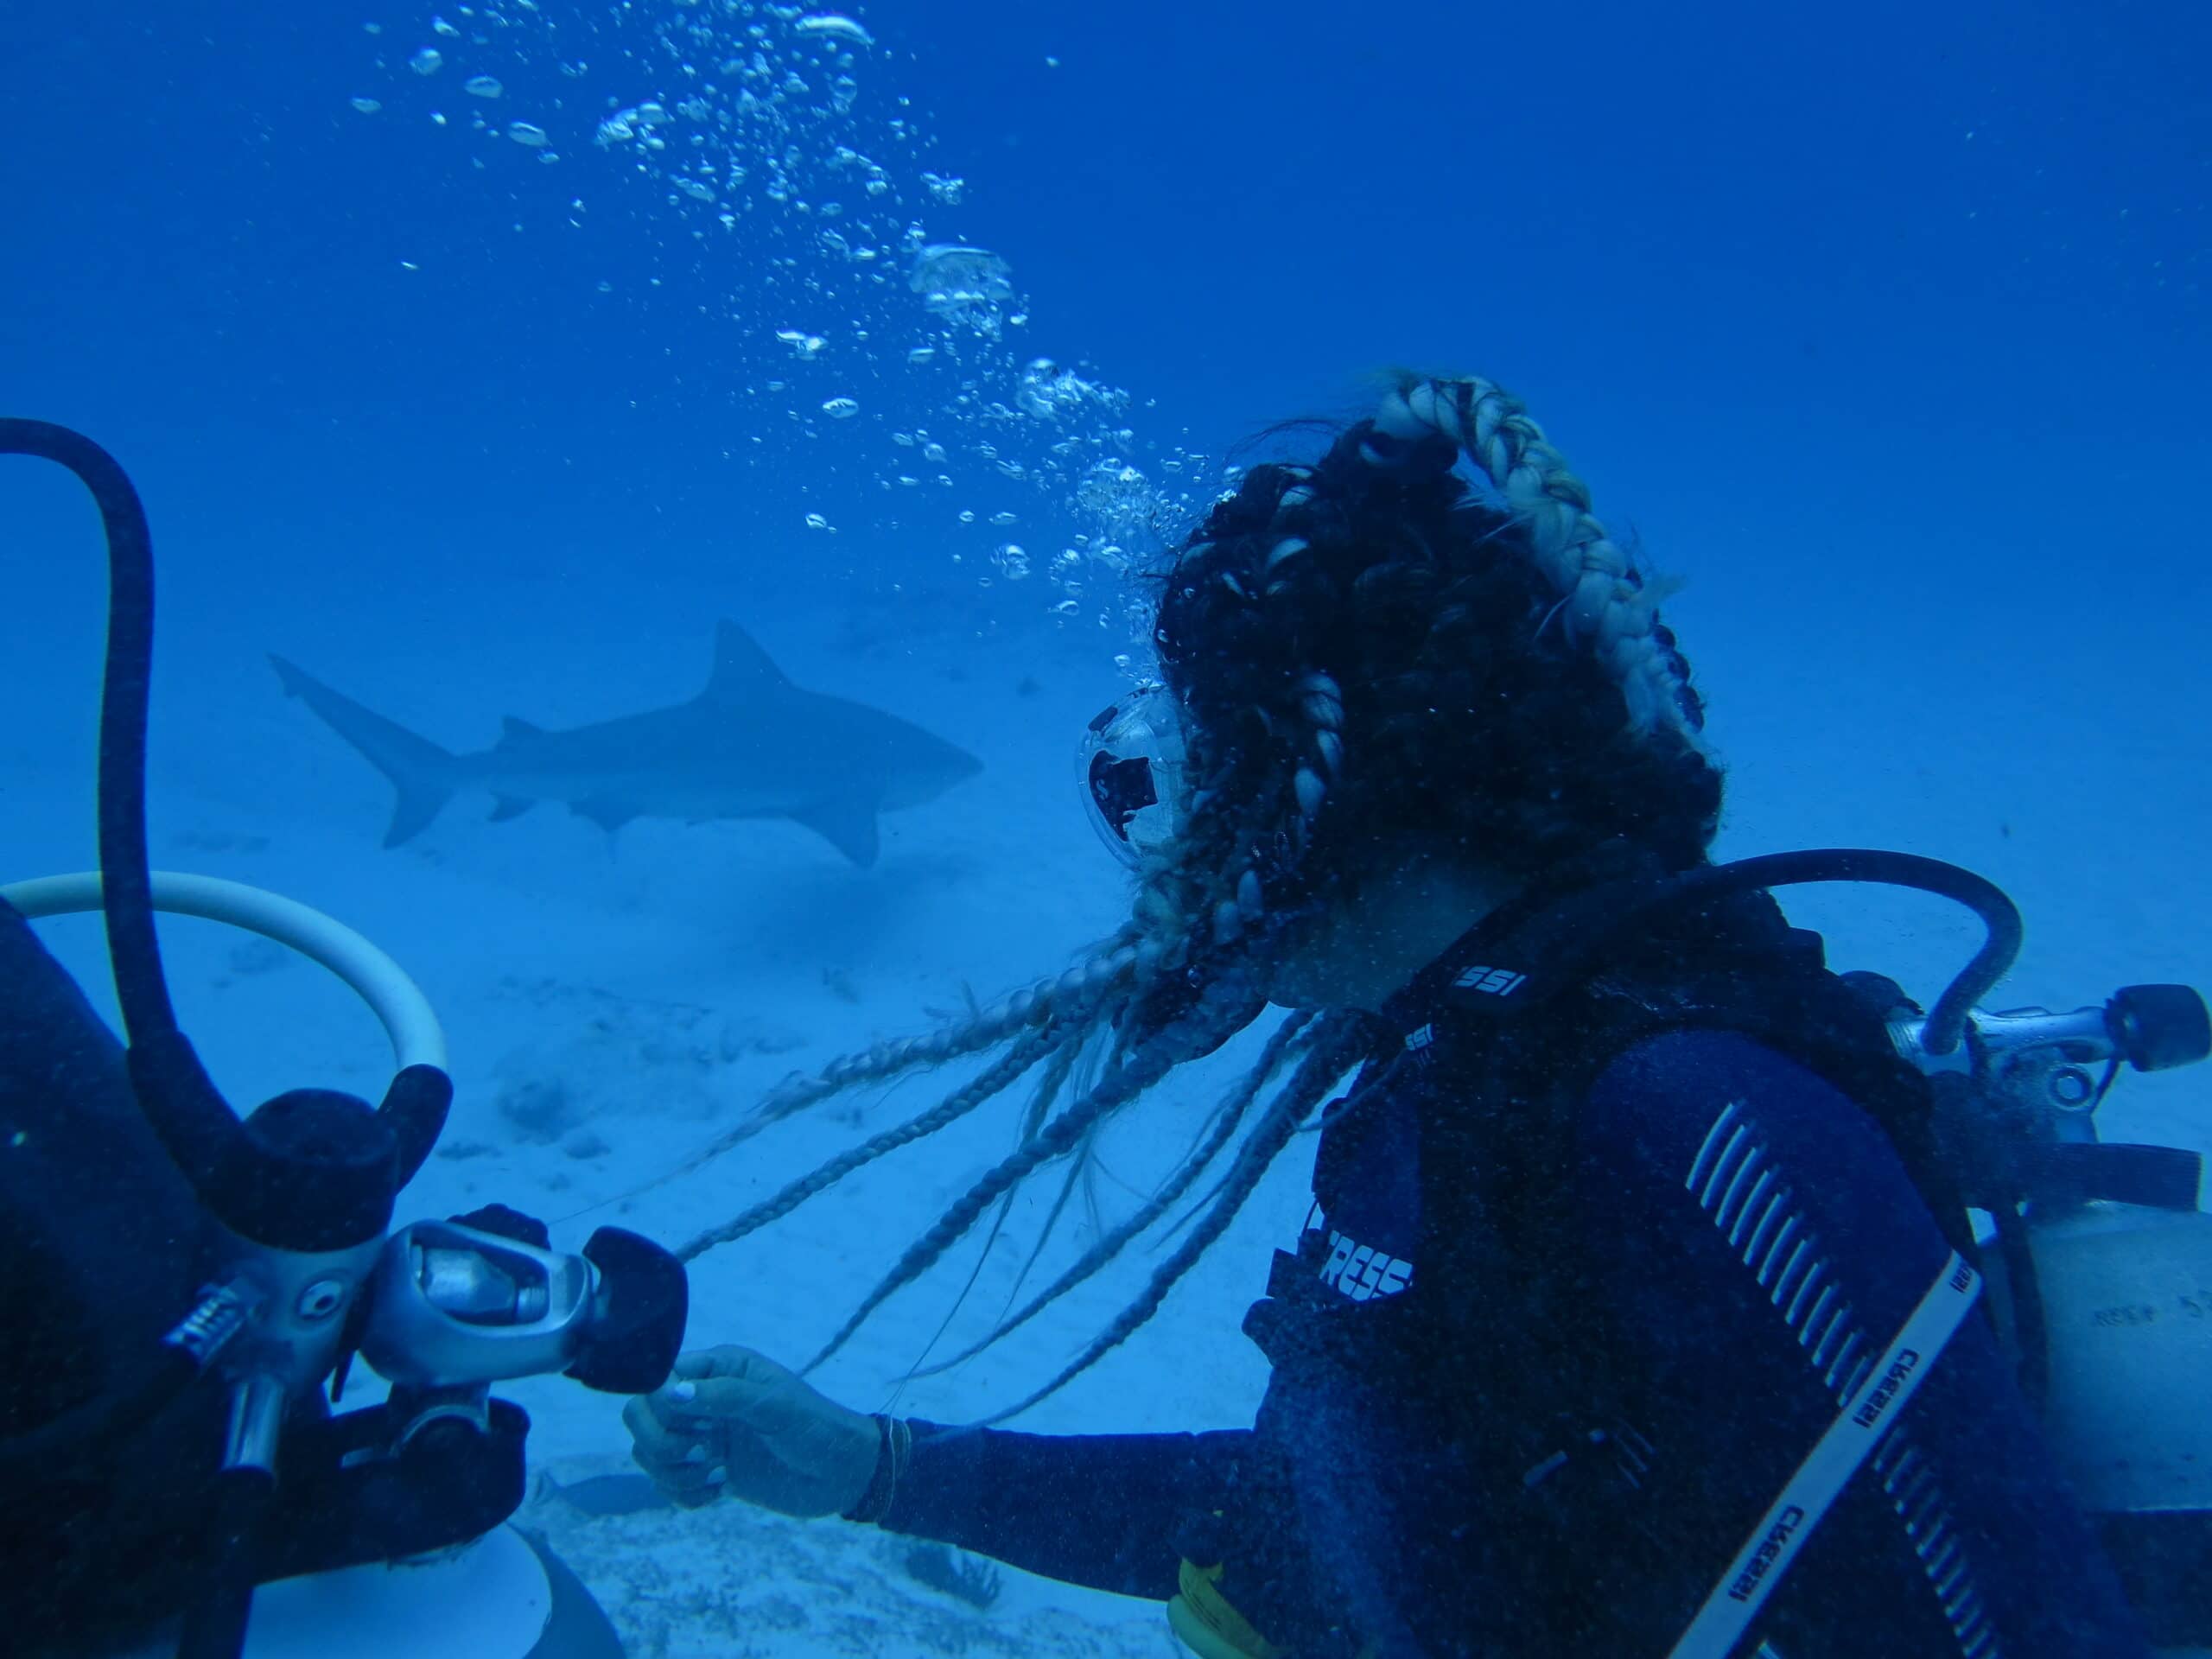 Underwater photo of a diver observing a bull shark from a safe distance.